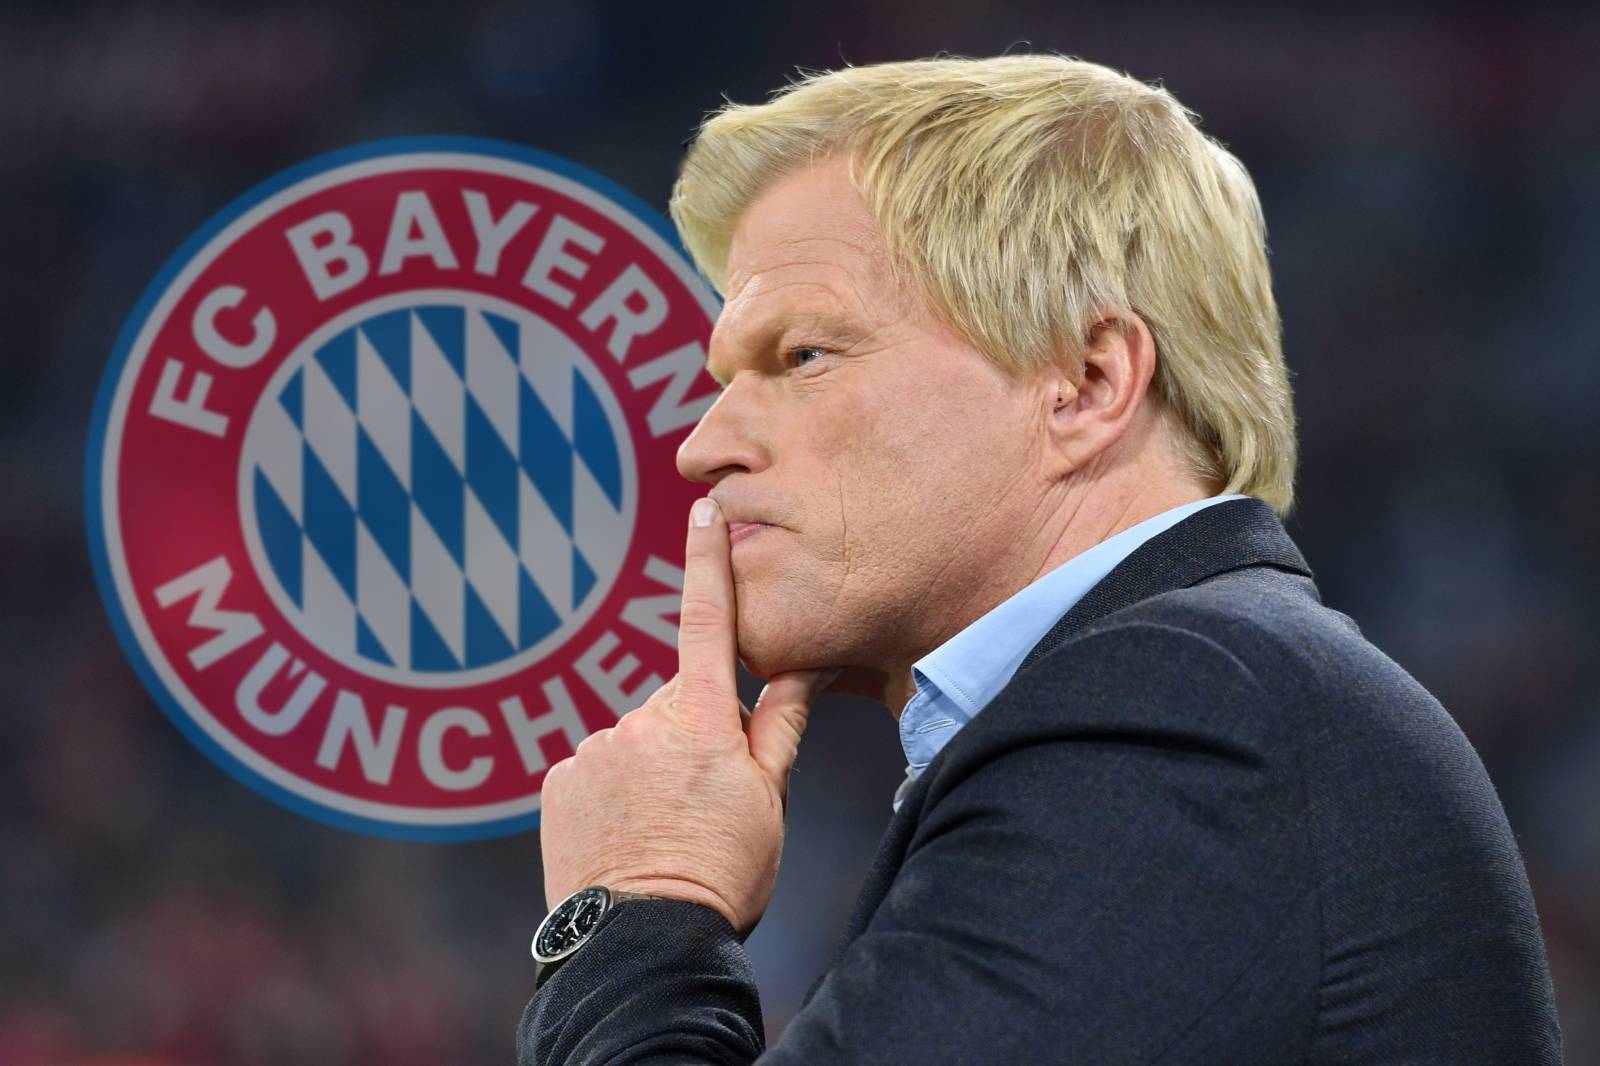 Return is approaching: Kahn and Rummenigge show unity.